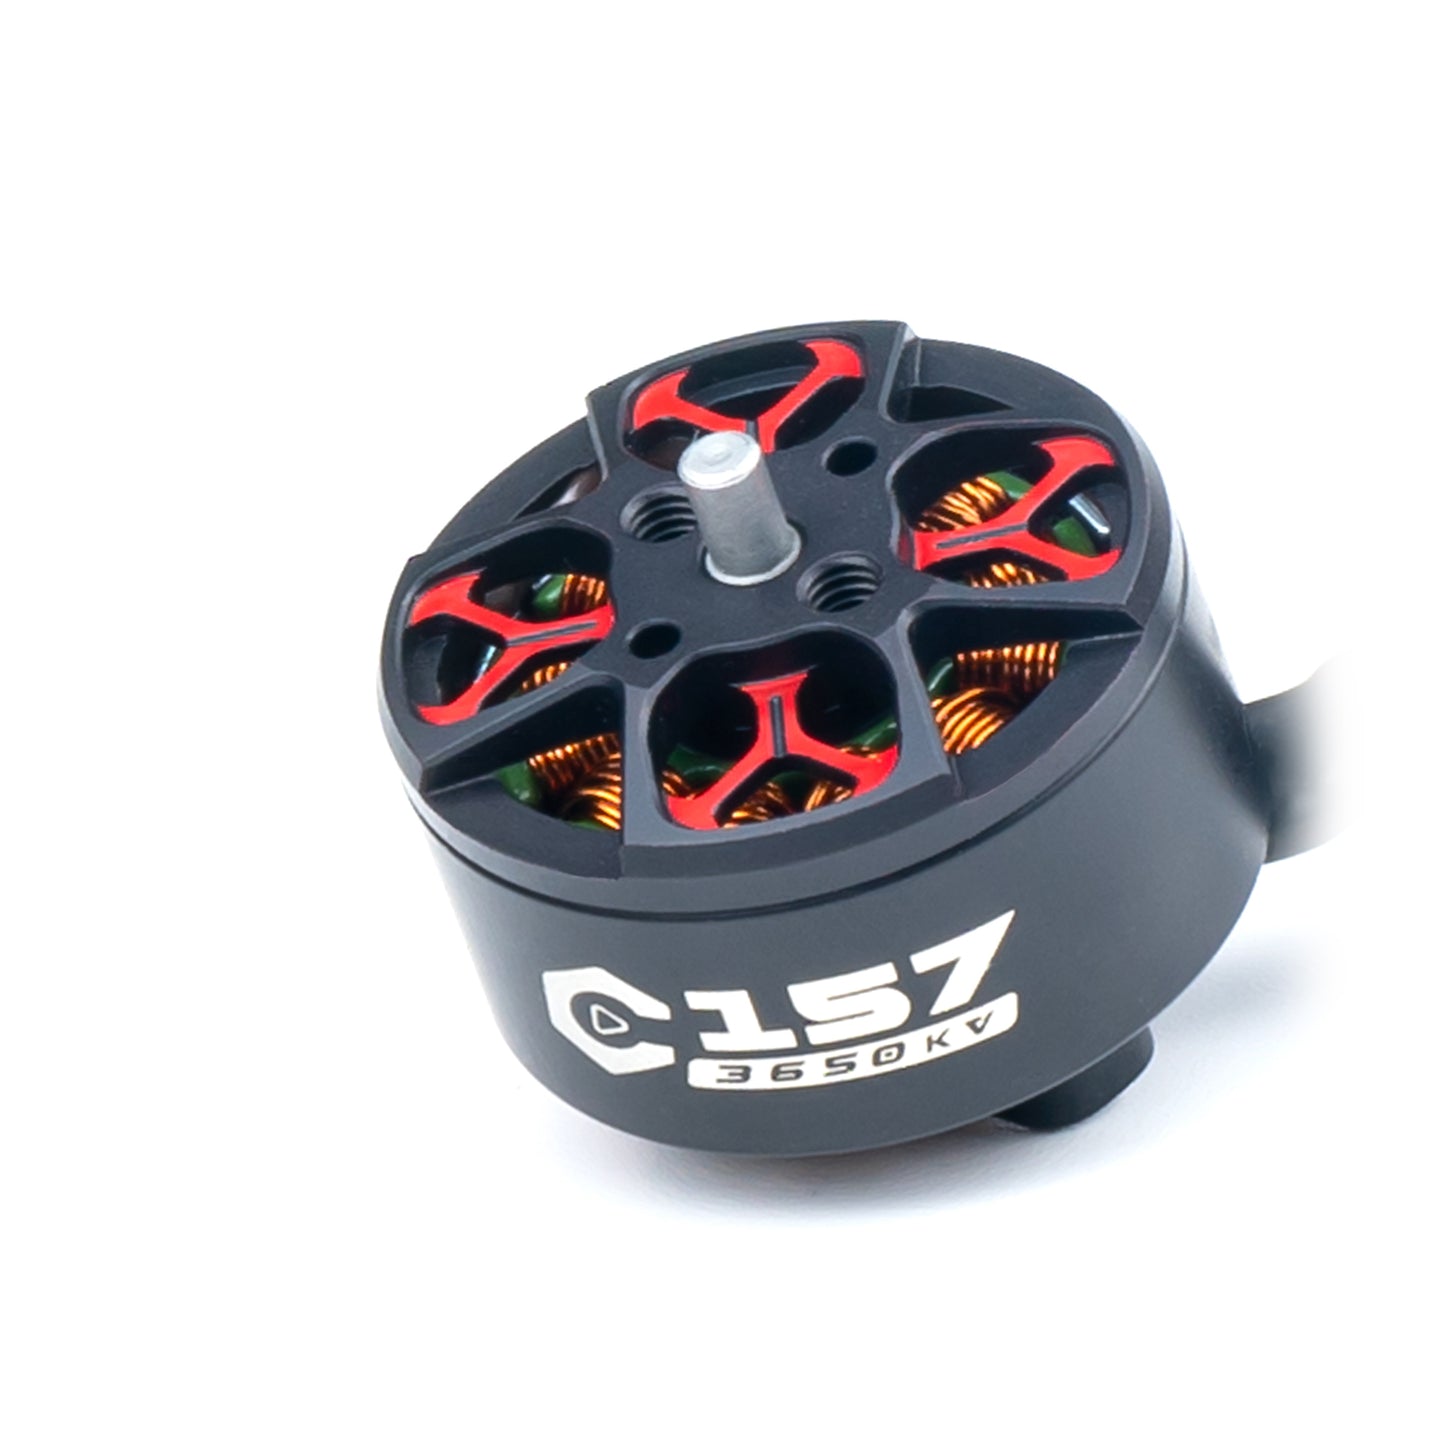 Axisflying C157 motors for cinewhoop 3.5inch for AVATA Drone